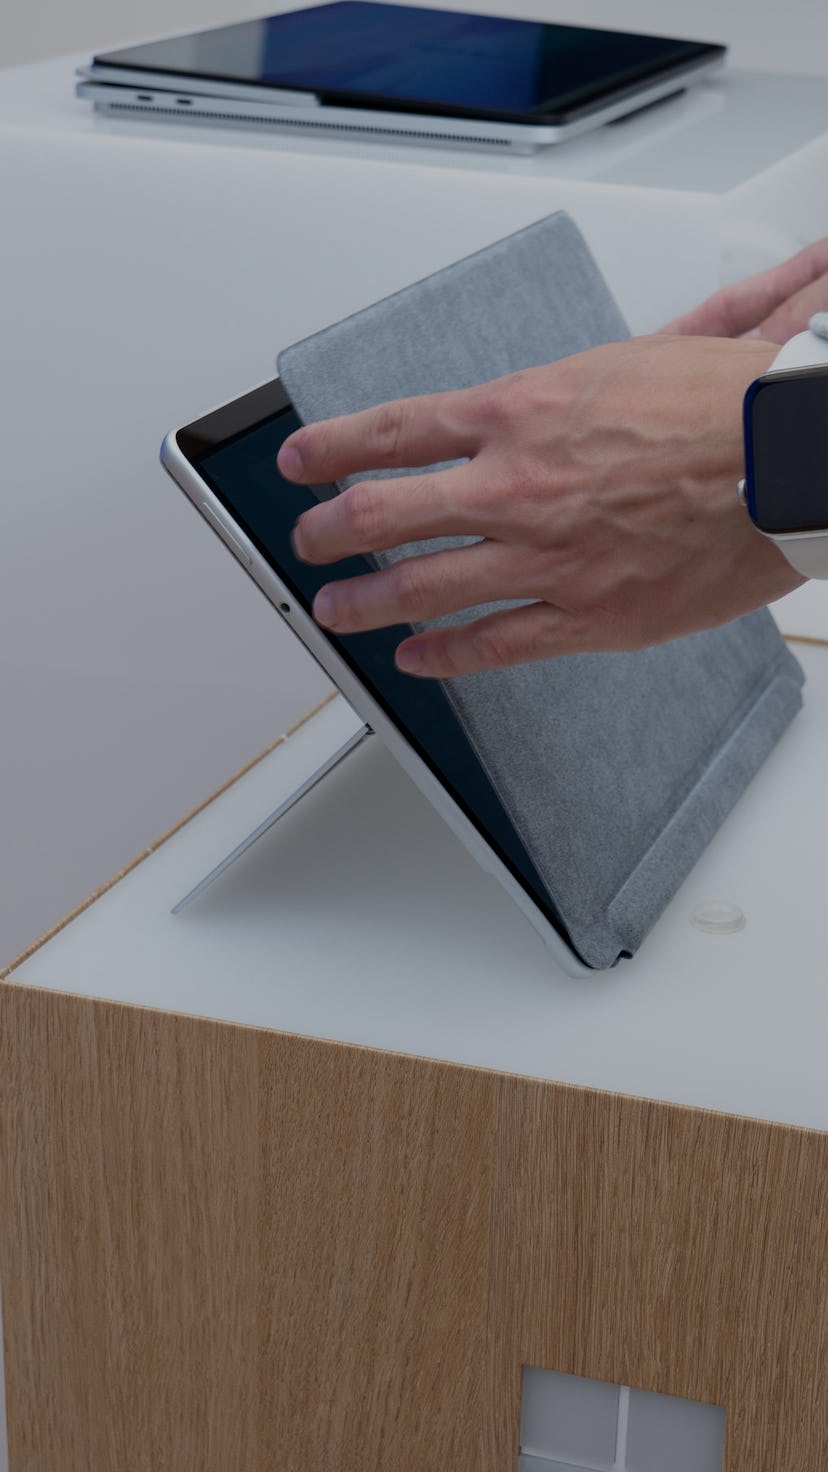 An image of the Microsoft Surface Pro 8 tablet